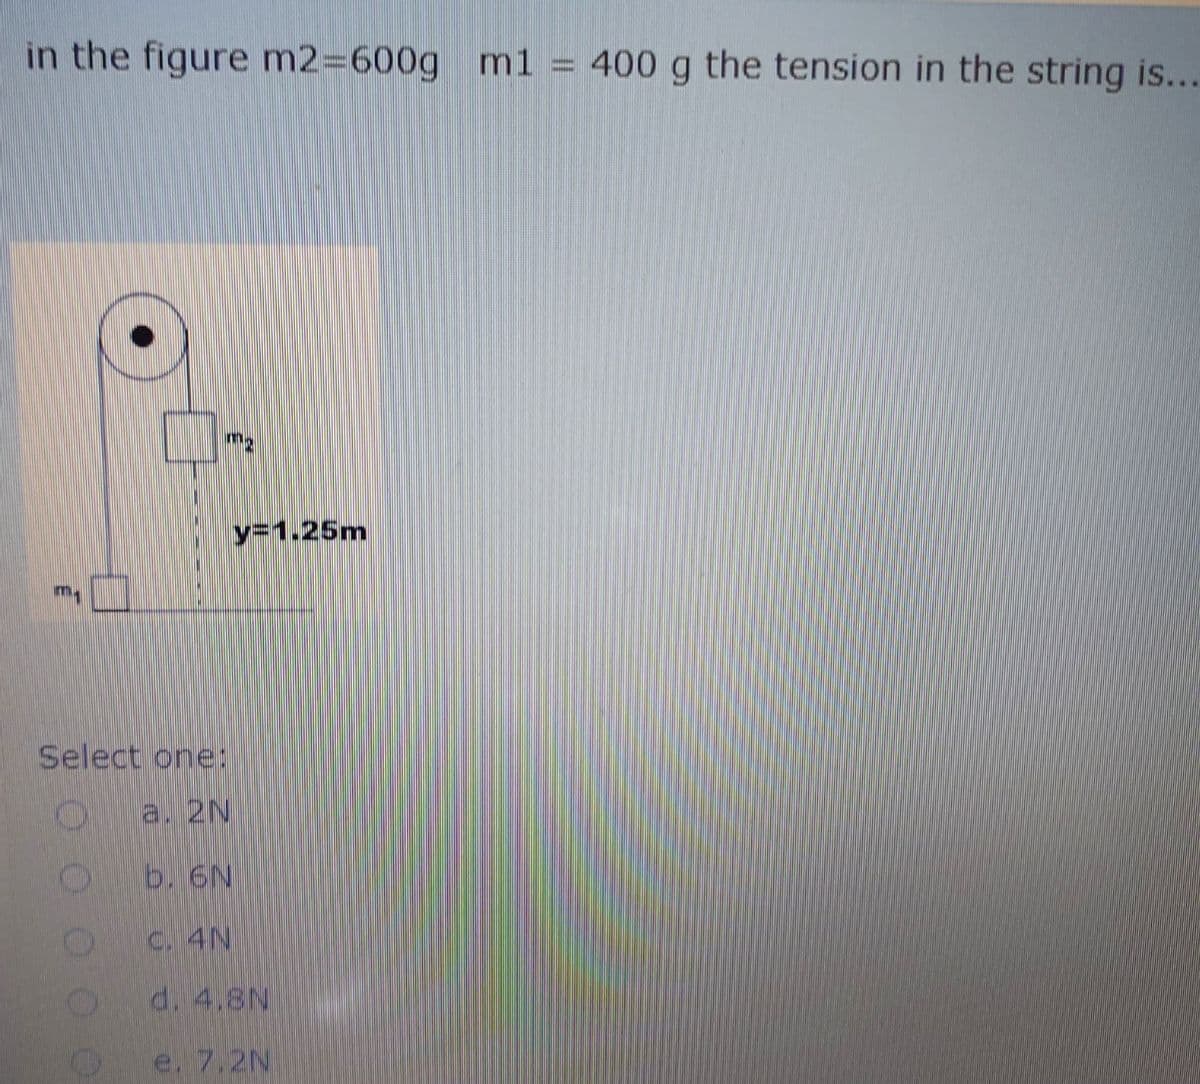 in the figure m2=600g ml
400 g the tension in the string is...
m2
y=1.25m
m,
Select one:
a. 2N
b. 6N
C. 4N
d. 4.8N
e. 7.2N
